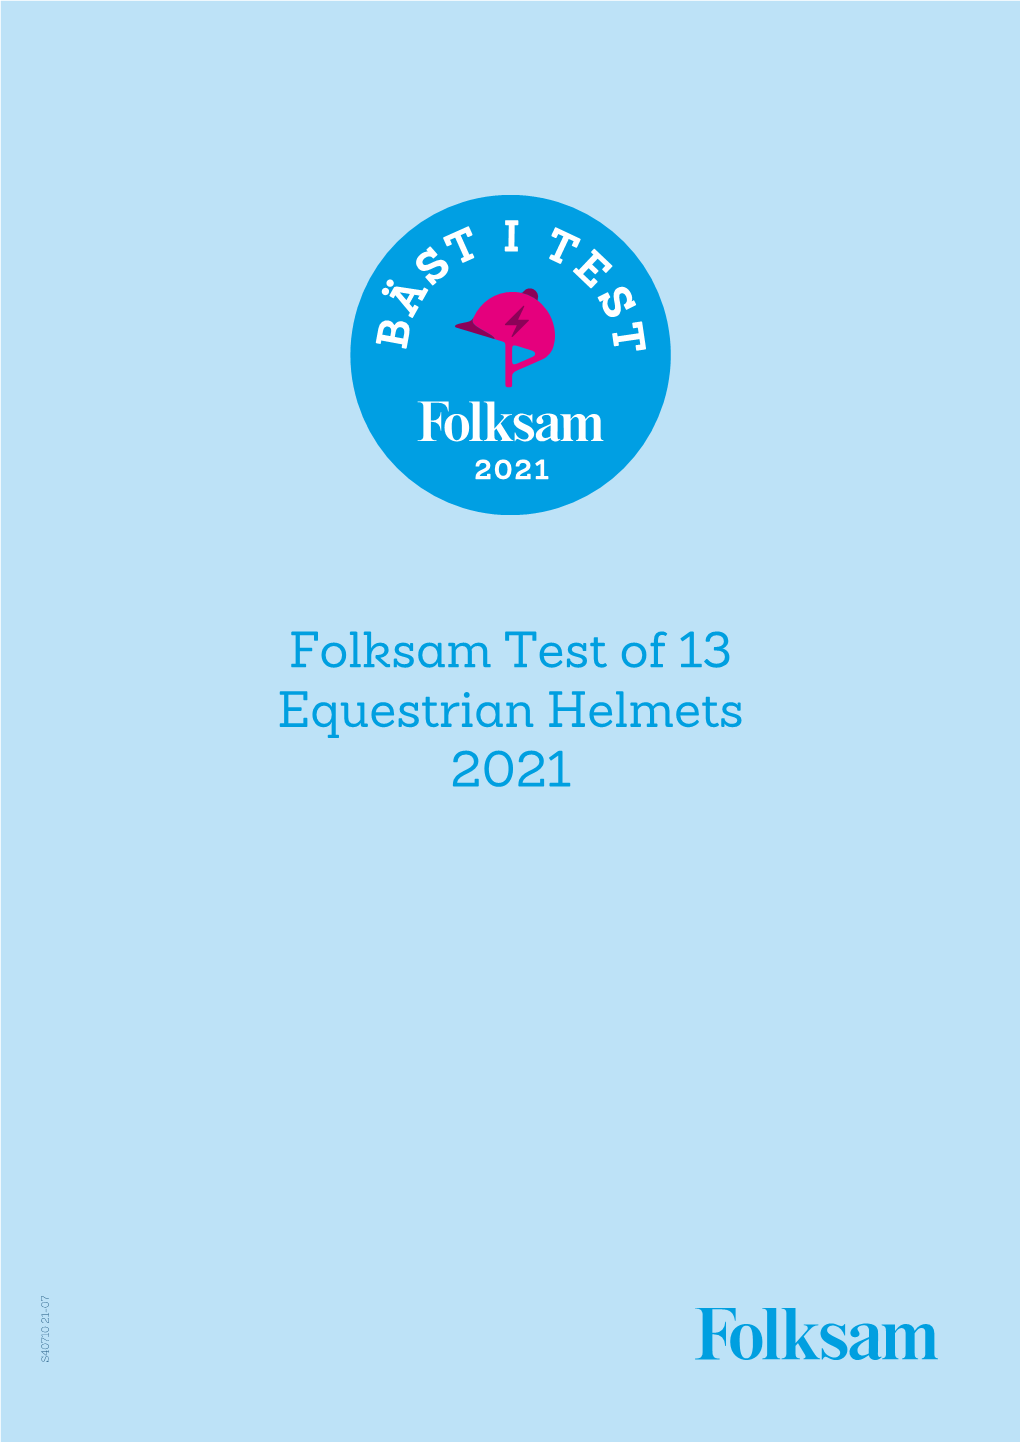 Folksam Test of 13 Equestrian Helmets 2021 S40710 21-07 S40710 This Is Why We Test Equestrian Helmets Approximately Half a Million Swedes Rides a Horse Regularly